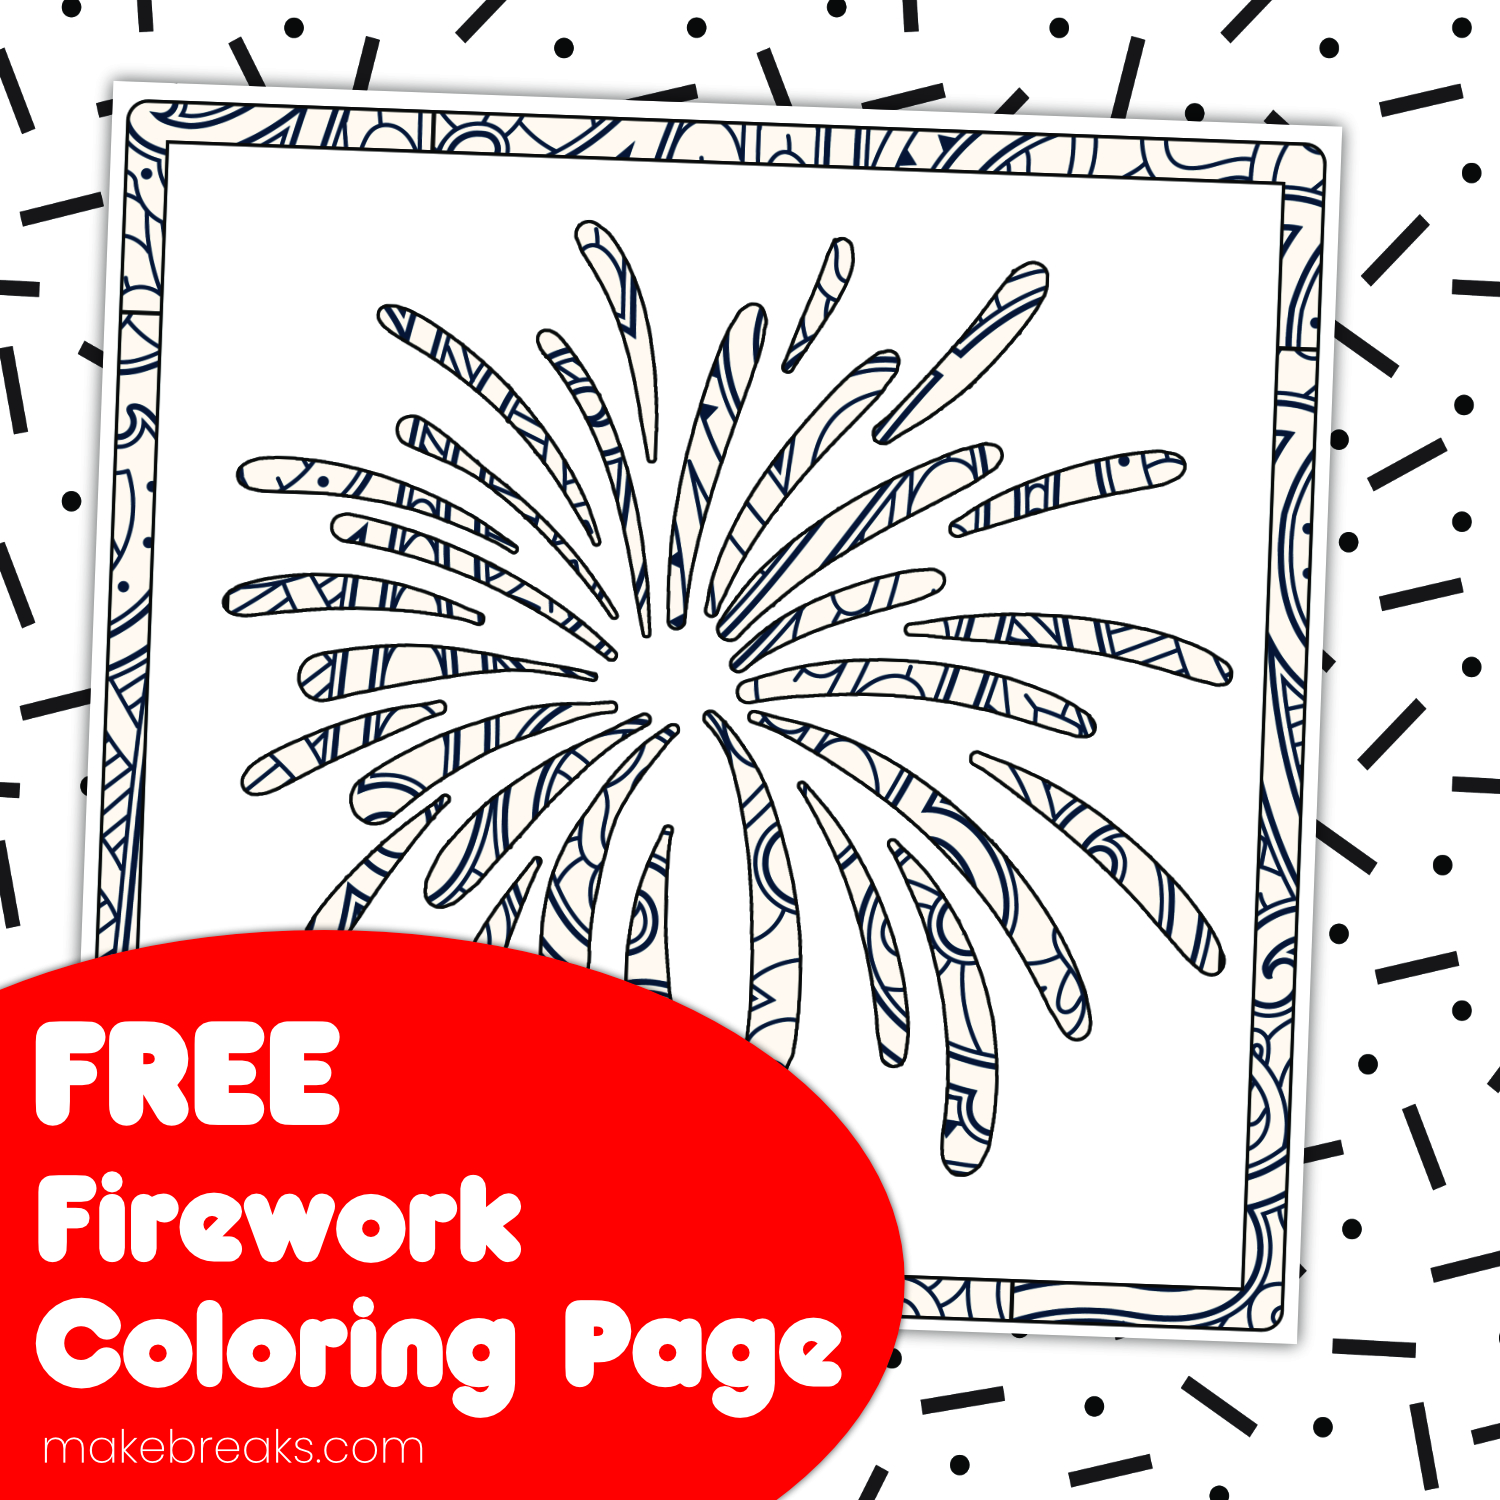 Free Printable Firework Coloring Page